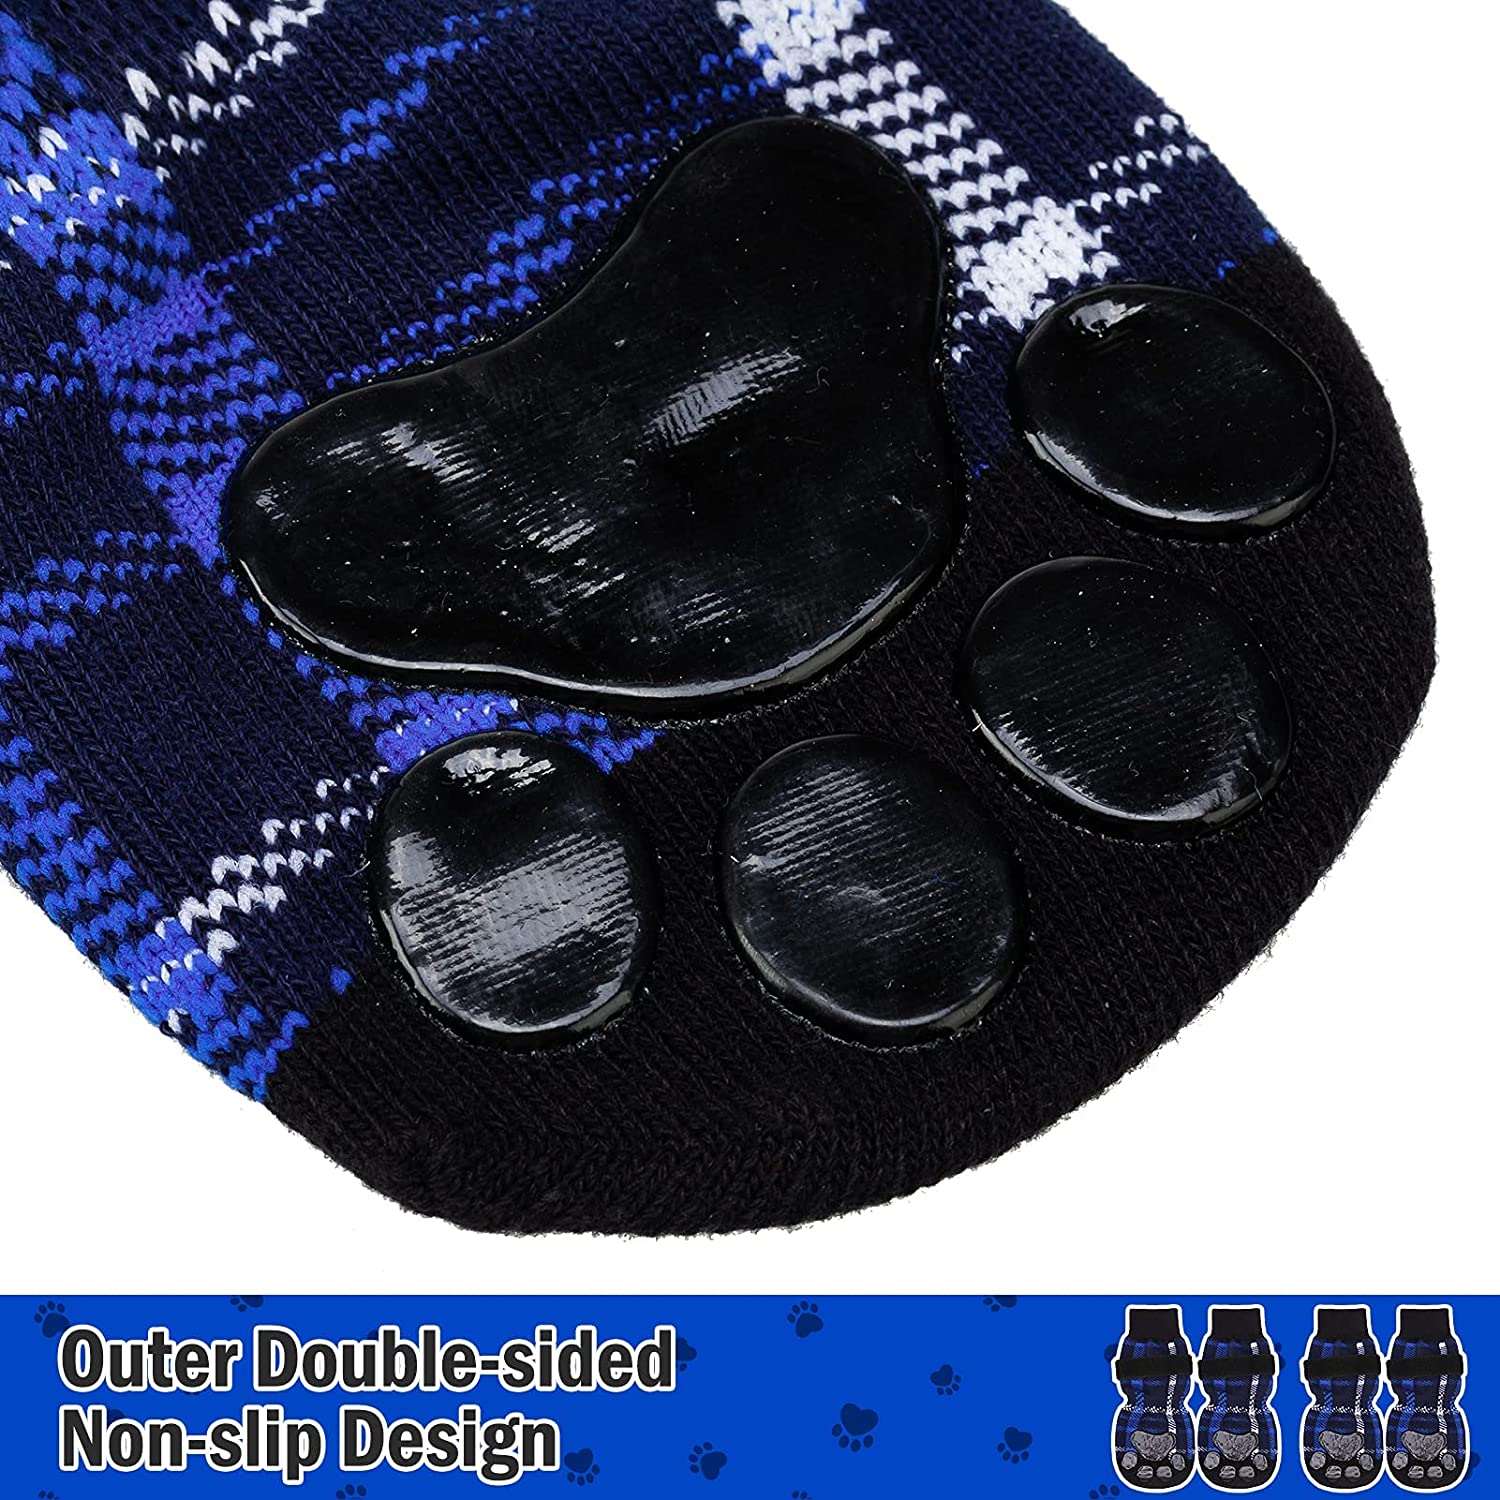 KUTKUT Anti-Slip Knit Socks for Medium, Large Dogs | Traction Control Non-Slip Pet Paw Protectors with Grips for Big Dogs | Better Control on Hardwood Floor Paw Protector - kutkutstyle